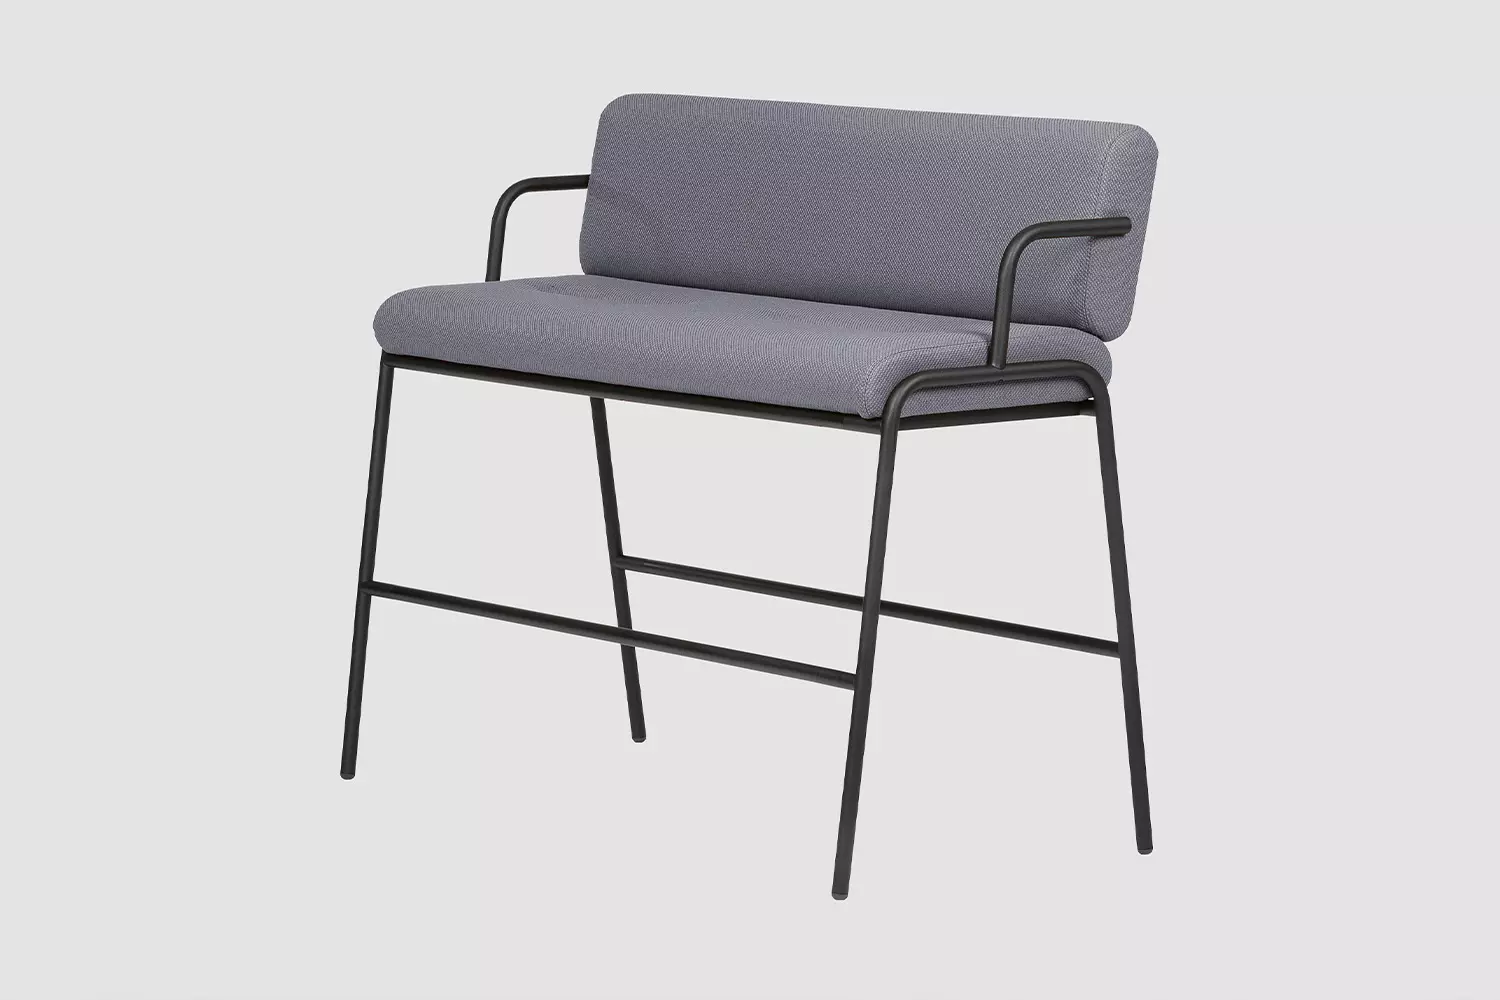 CASUAL Bench high, Pholstered Modular system Bench, Bene Office furniture, Image 1